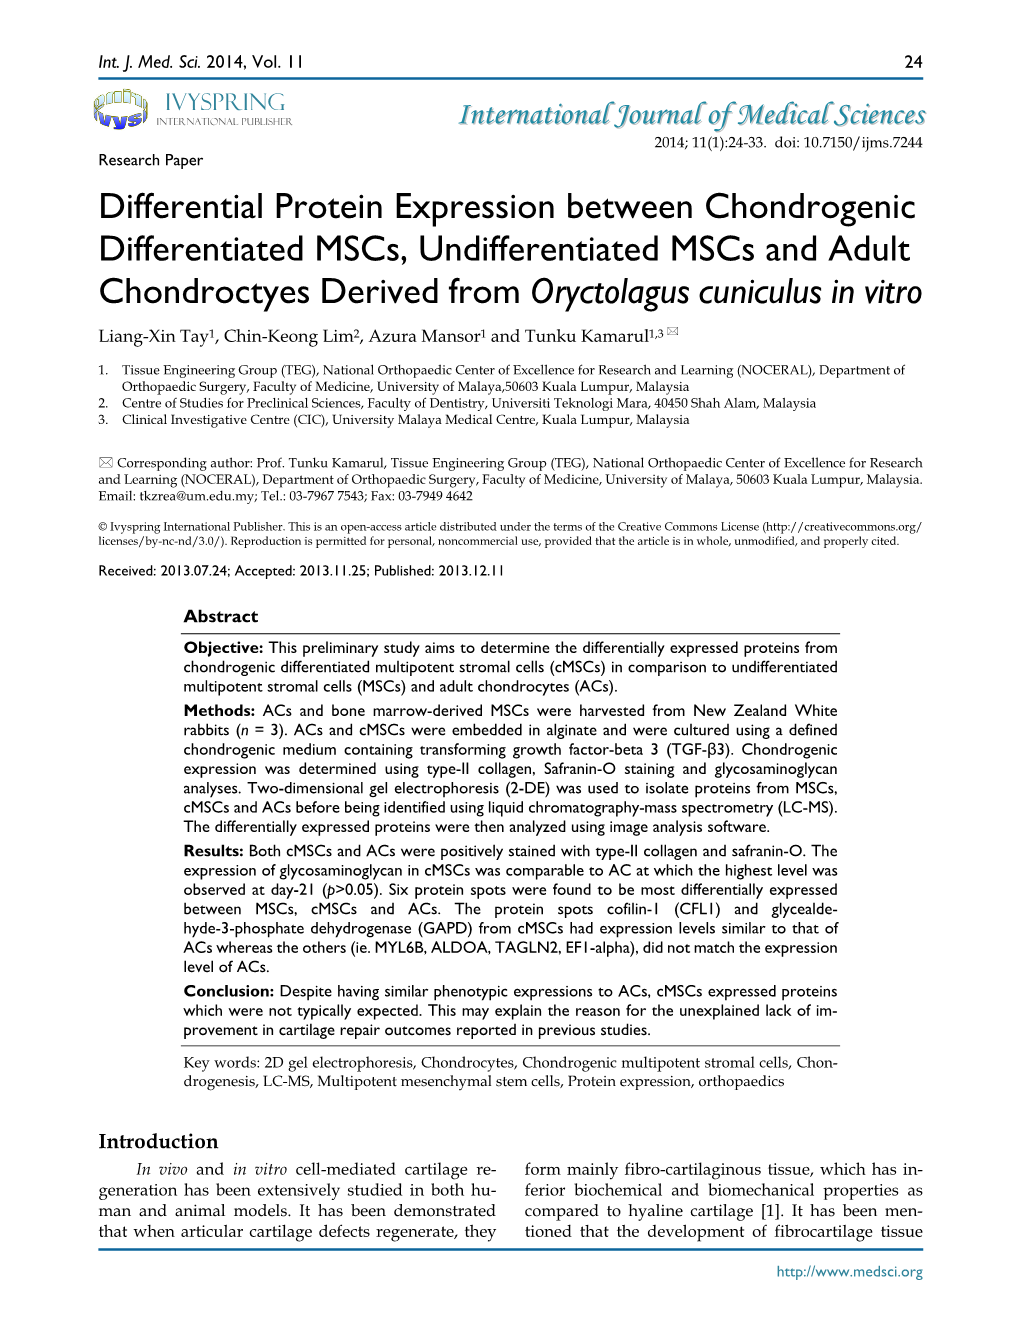 Differential Protein Expression Between Chondrogenic